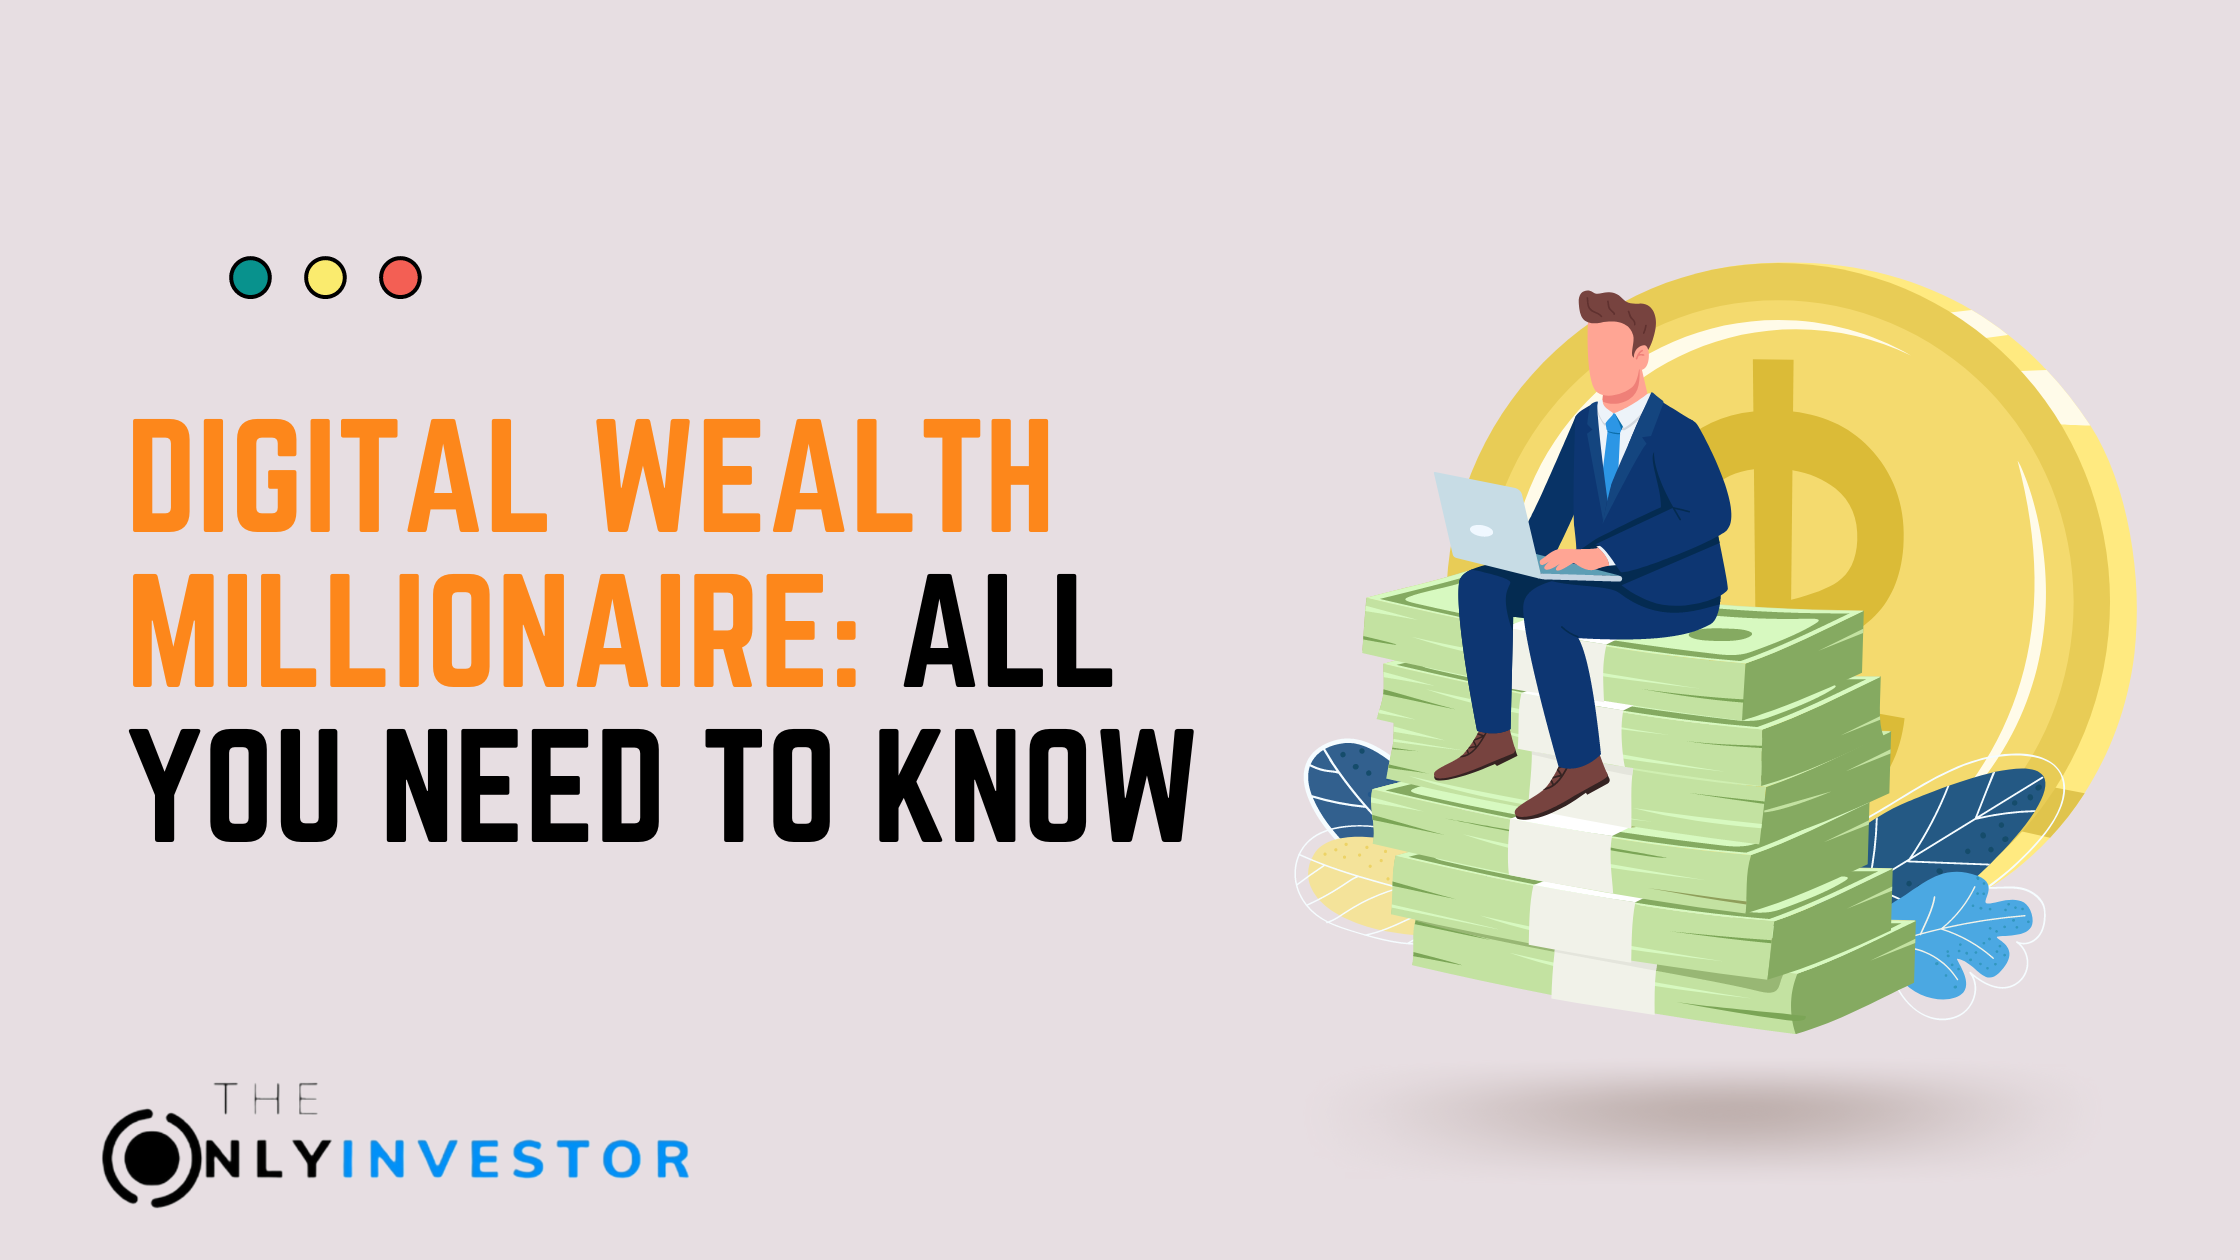 Digital Wealth Millionaire: All you need to know